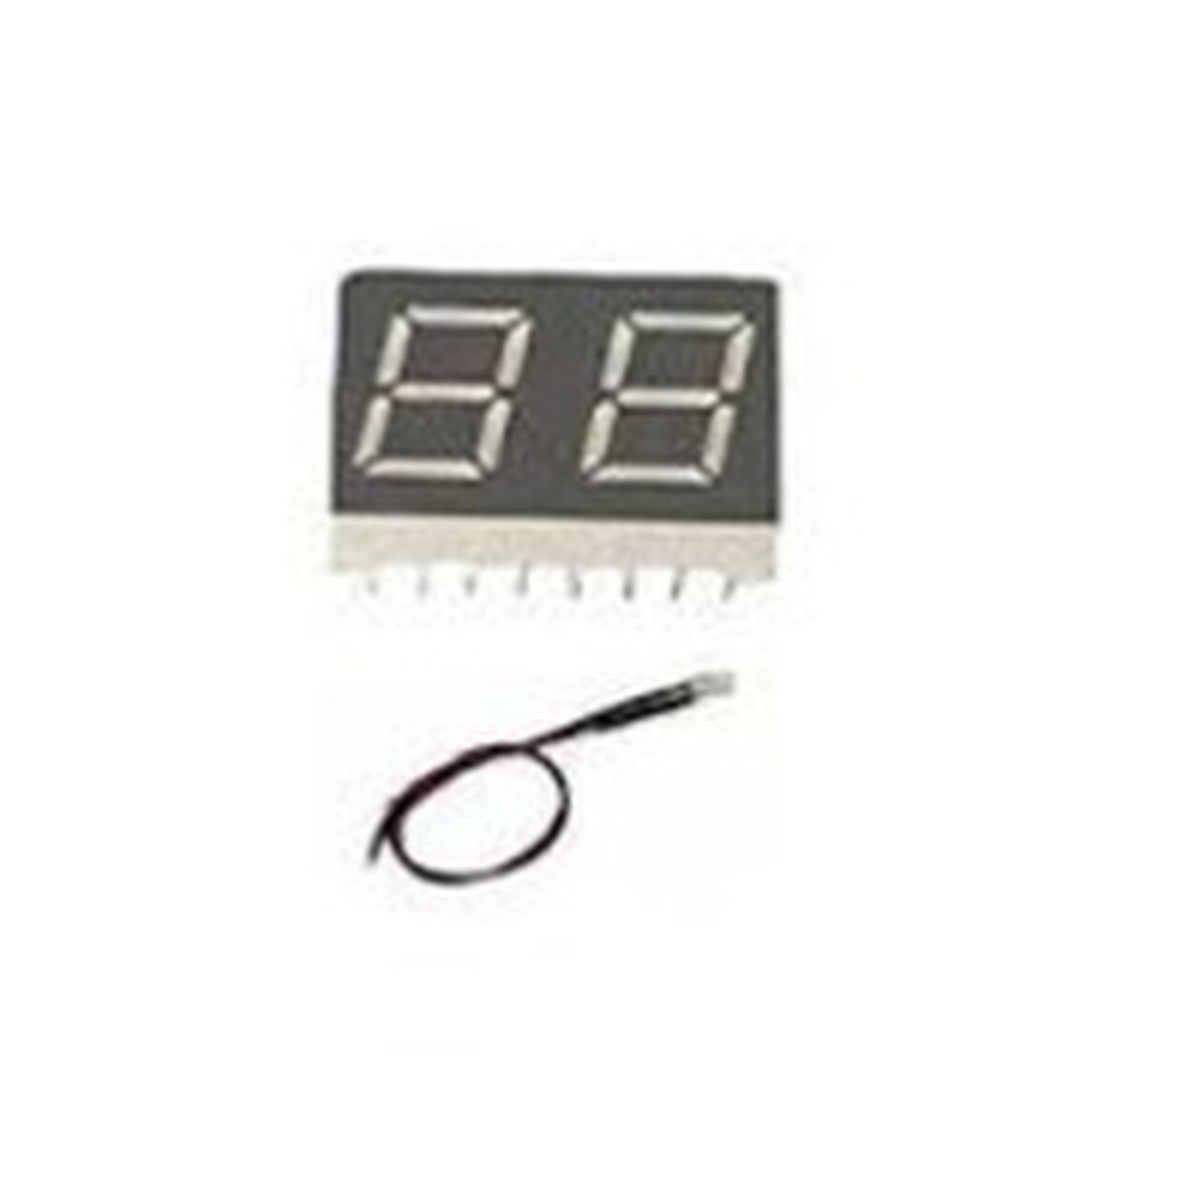 Picture of Workman LEDCHG-4233GA Replacement 2 Digit Channel Display, Green